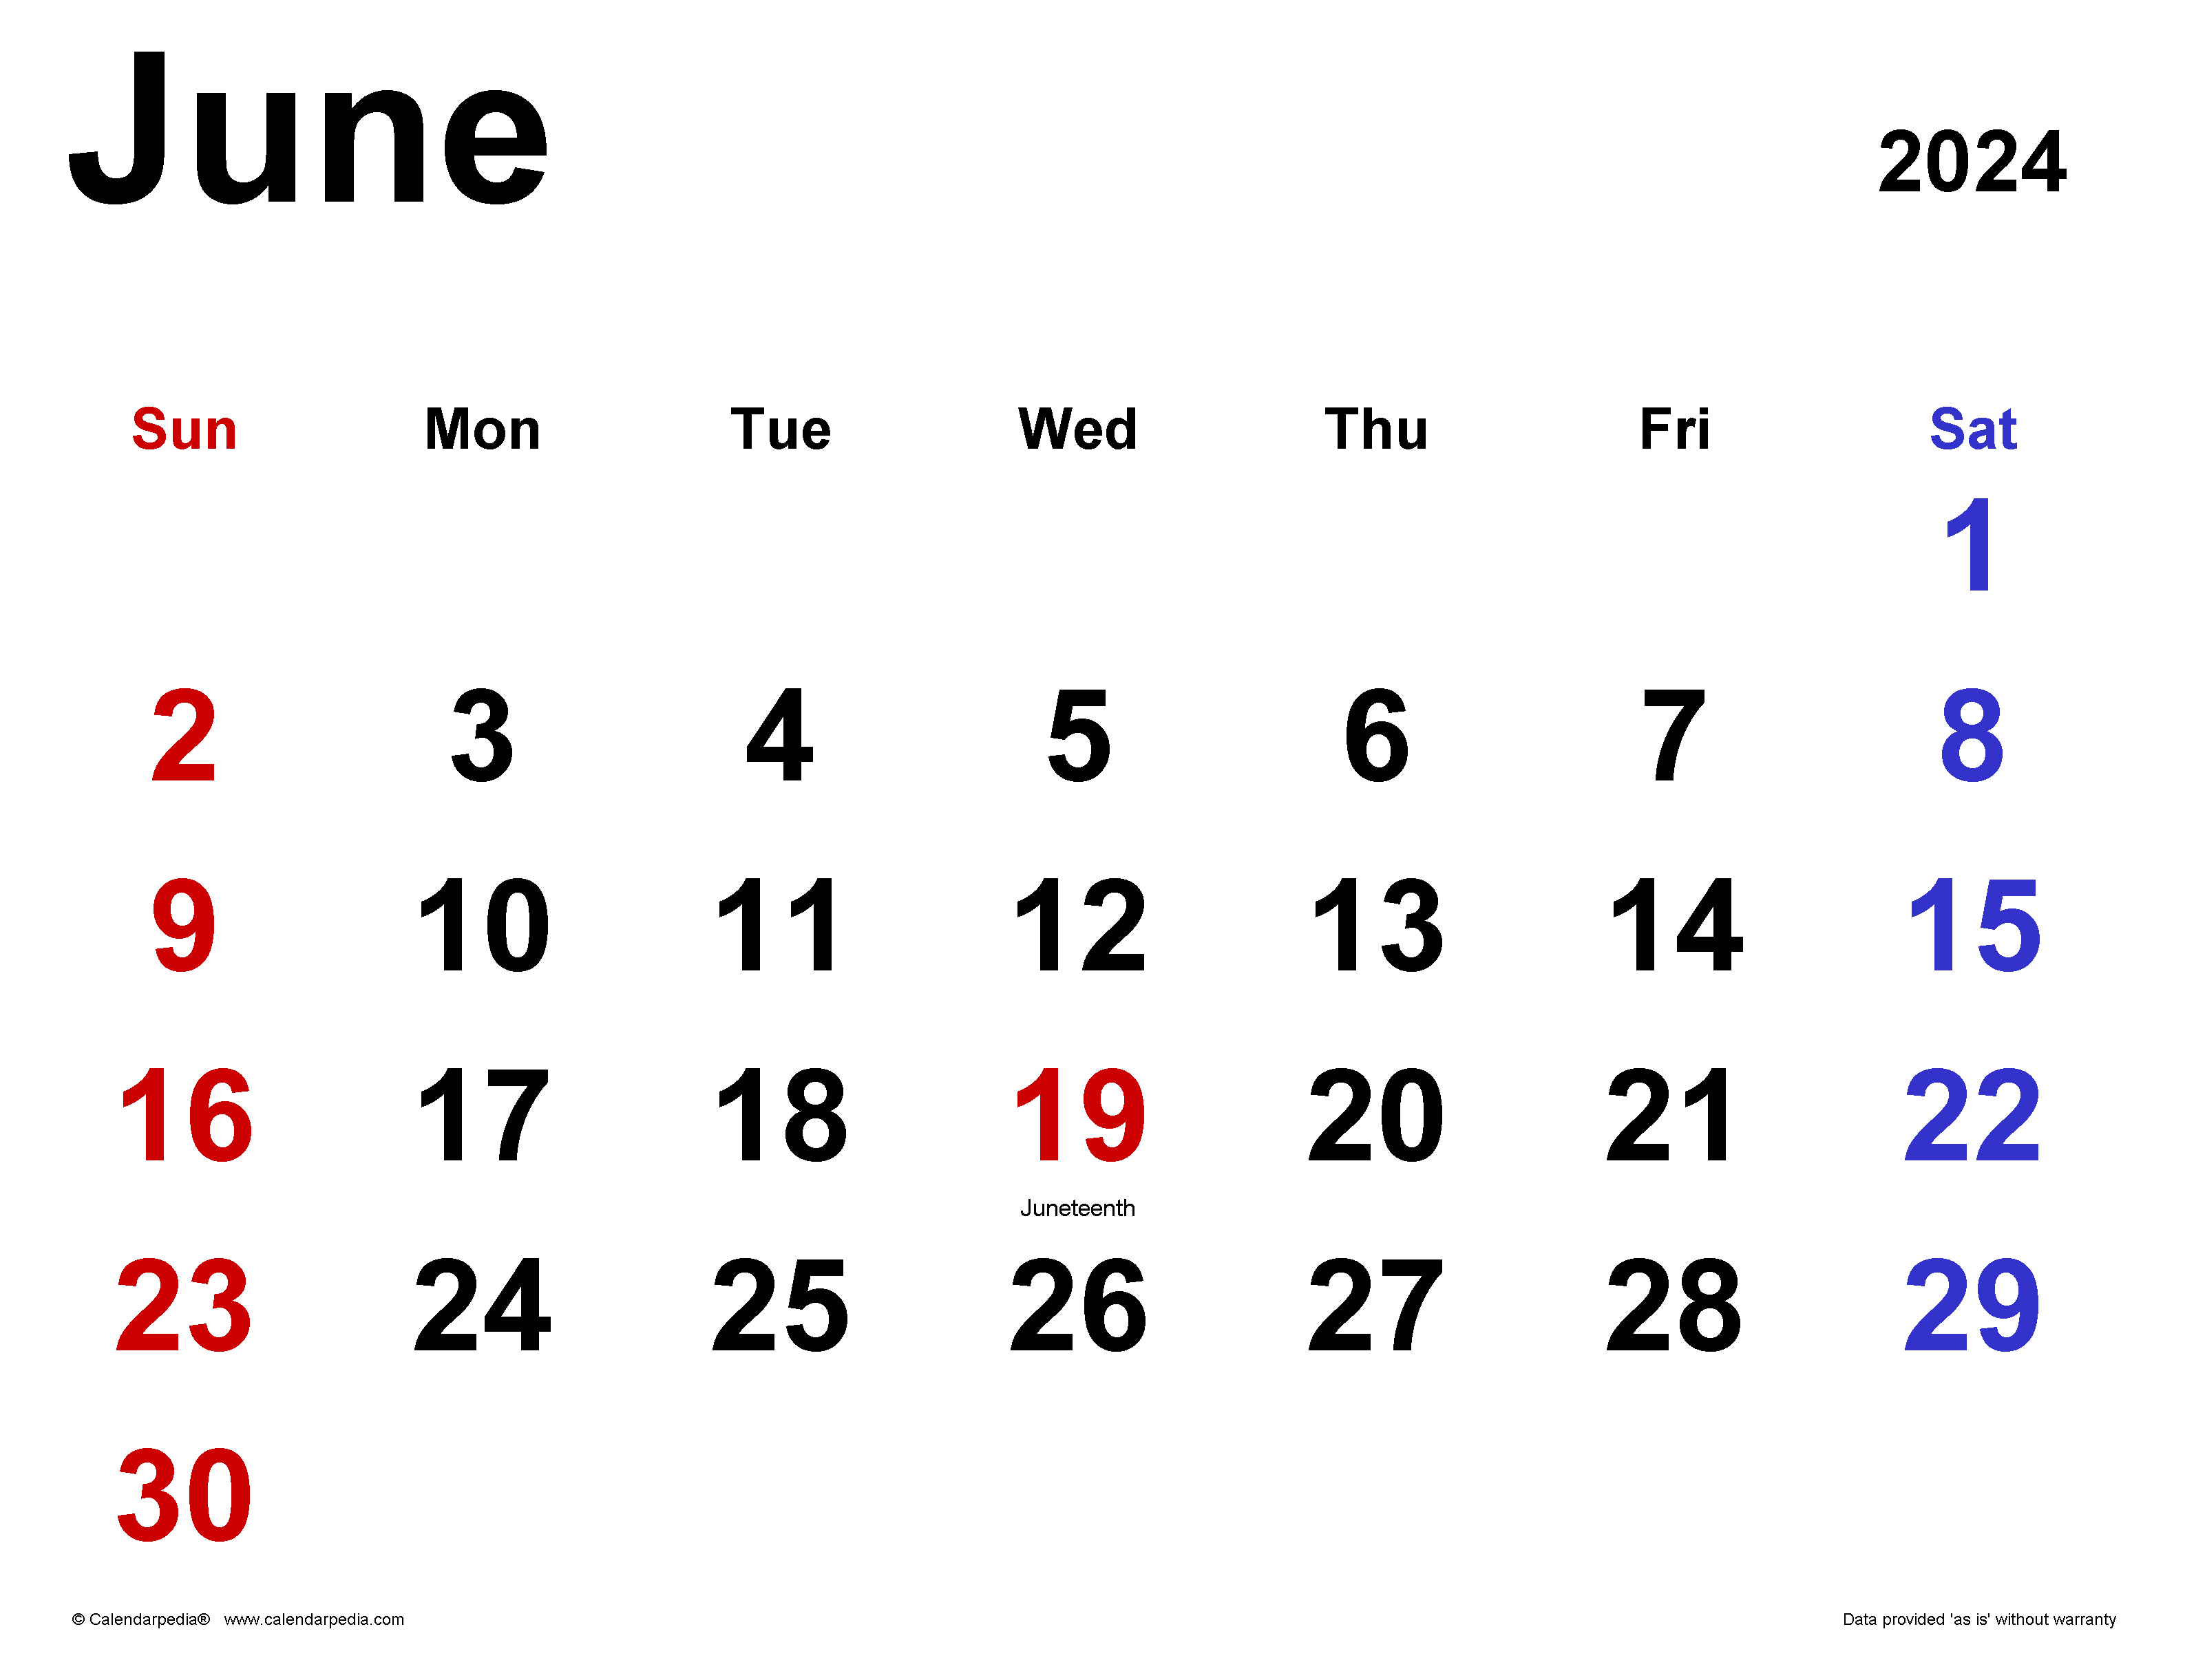 June 2024 Calendar | Templates For Word, Excel And Pdf with regard to 2024 Calendar June Month